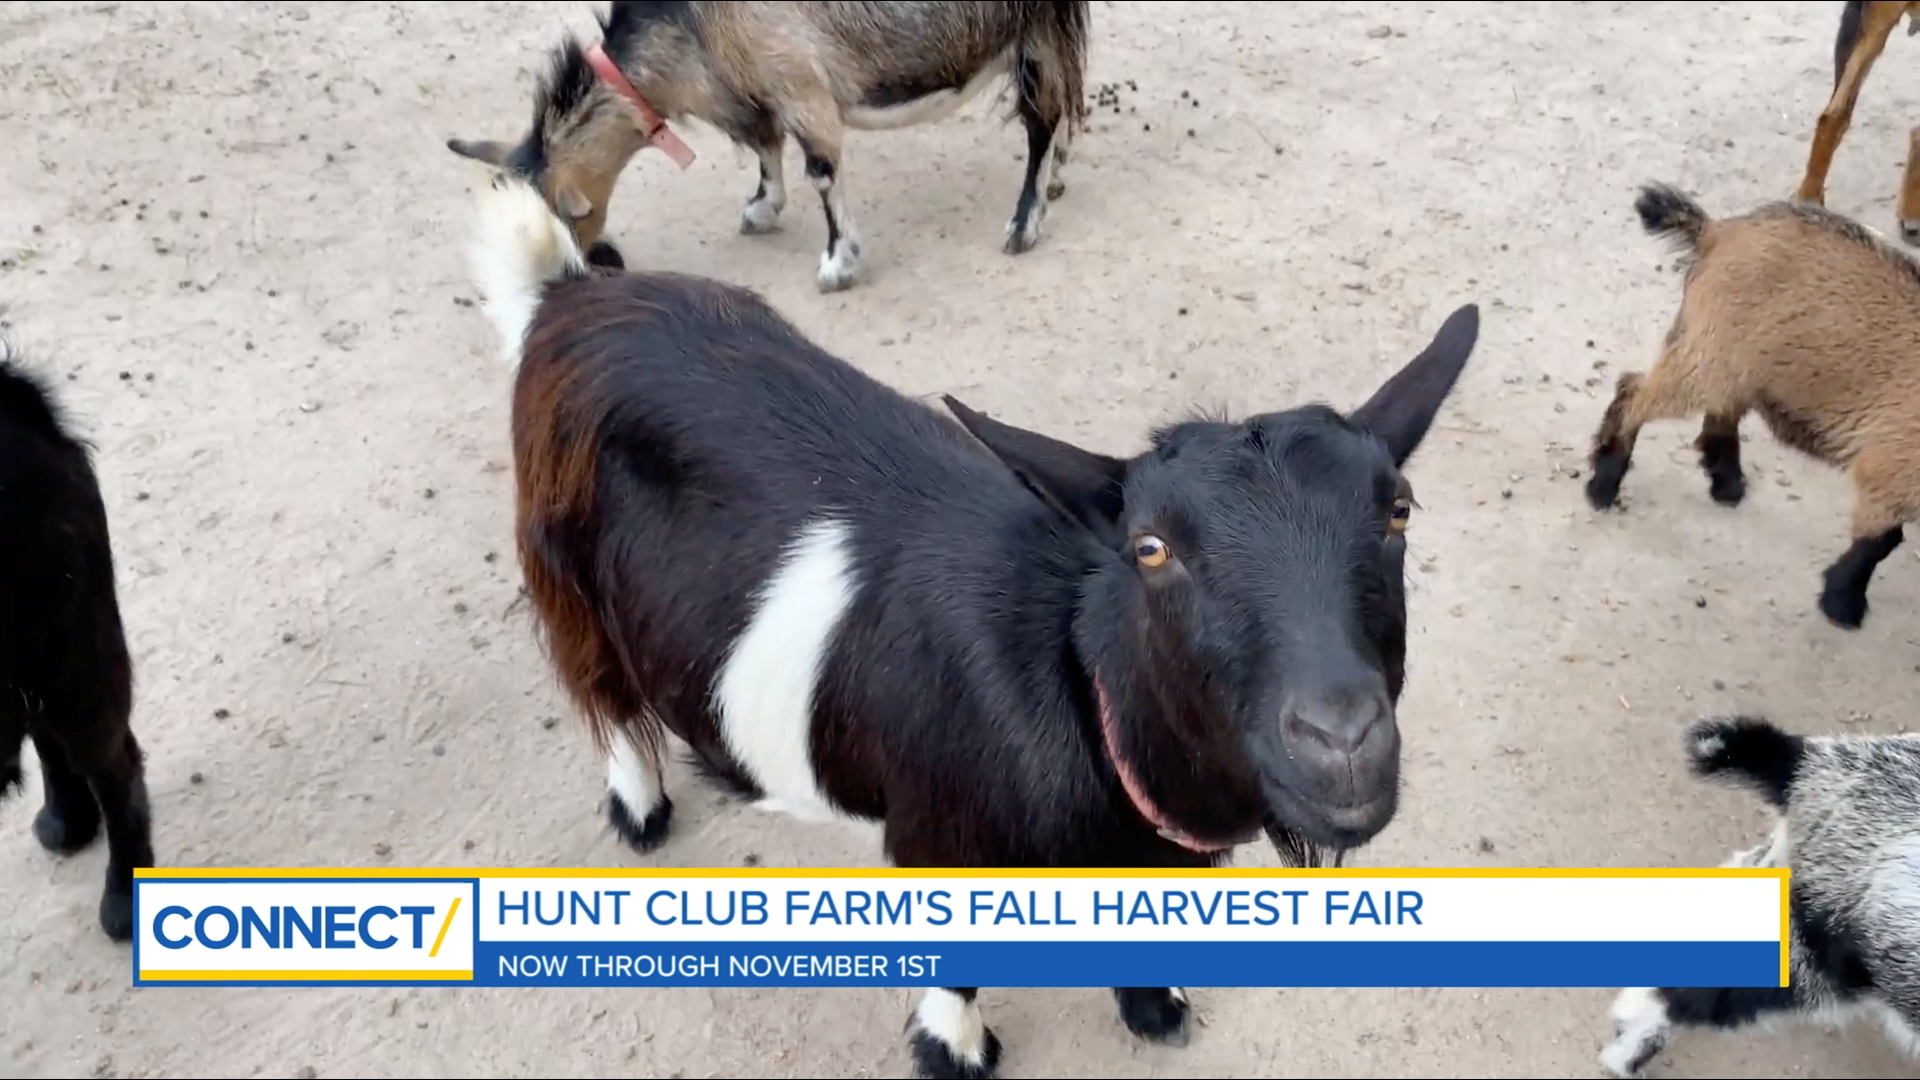 Starting Saturday, October 10, you can have a good, spooky time at Hunt Club Farm's Fall Harvest Fair! It's open every weekend through November 1.